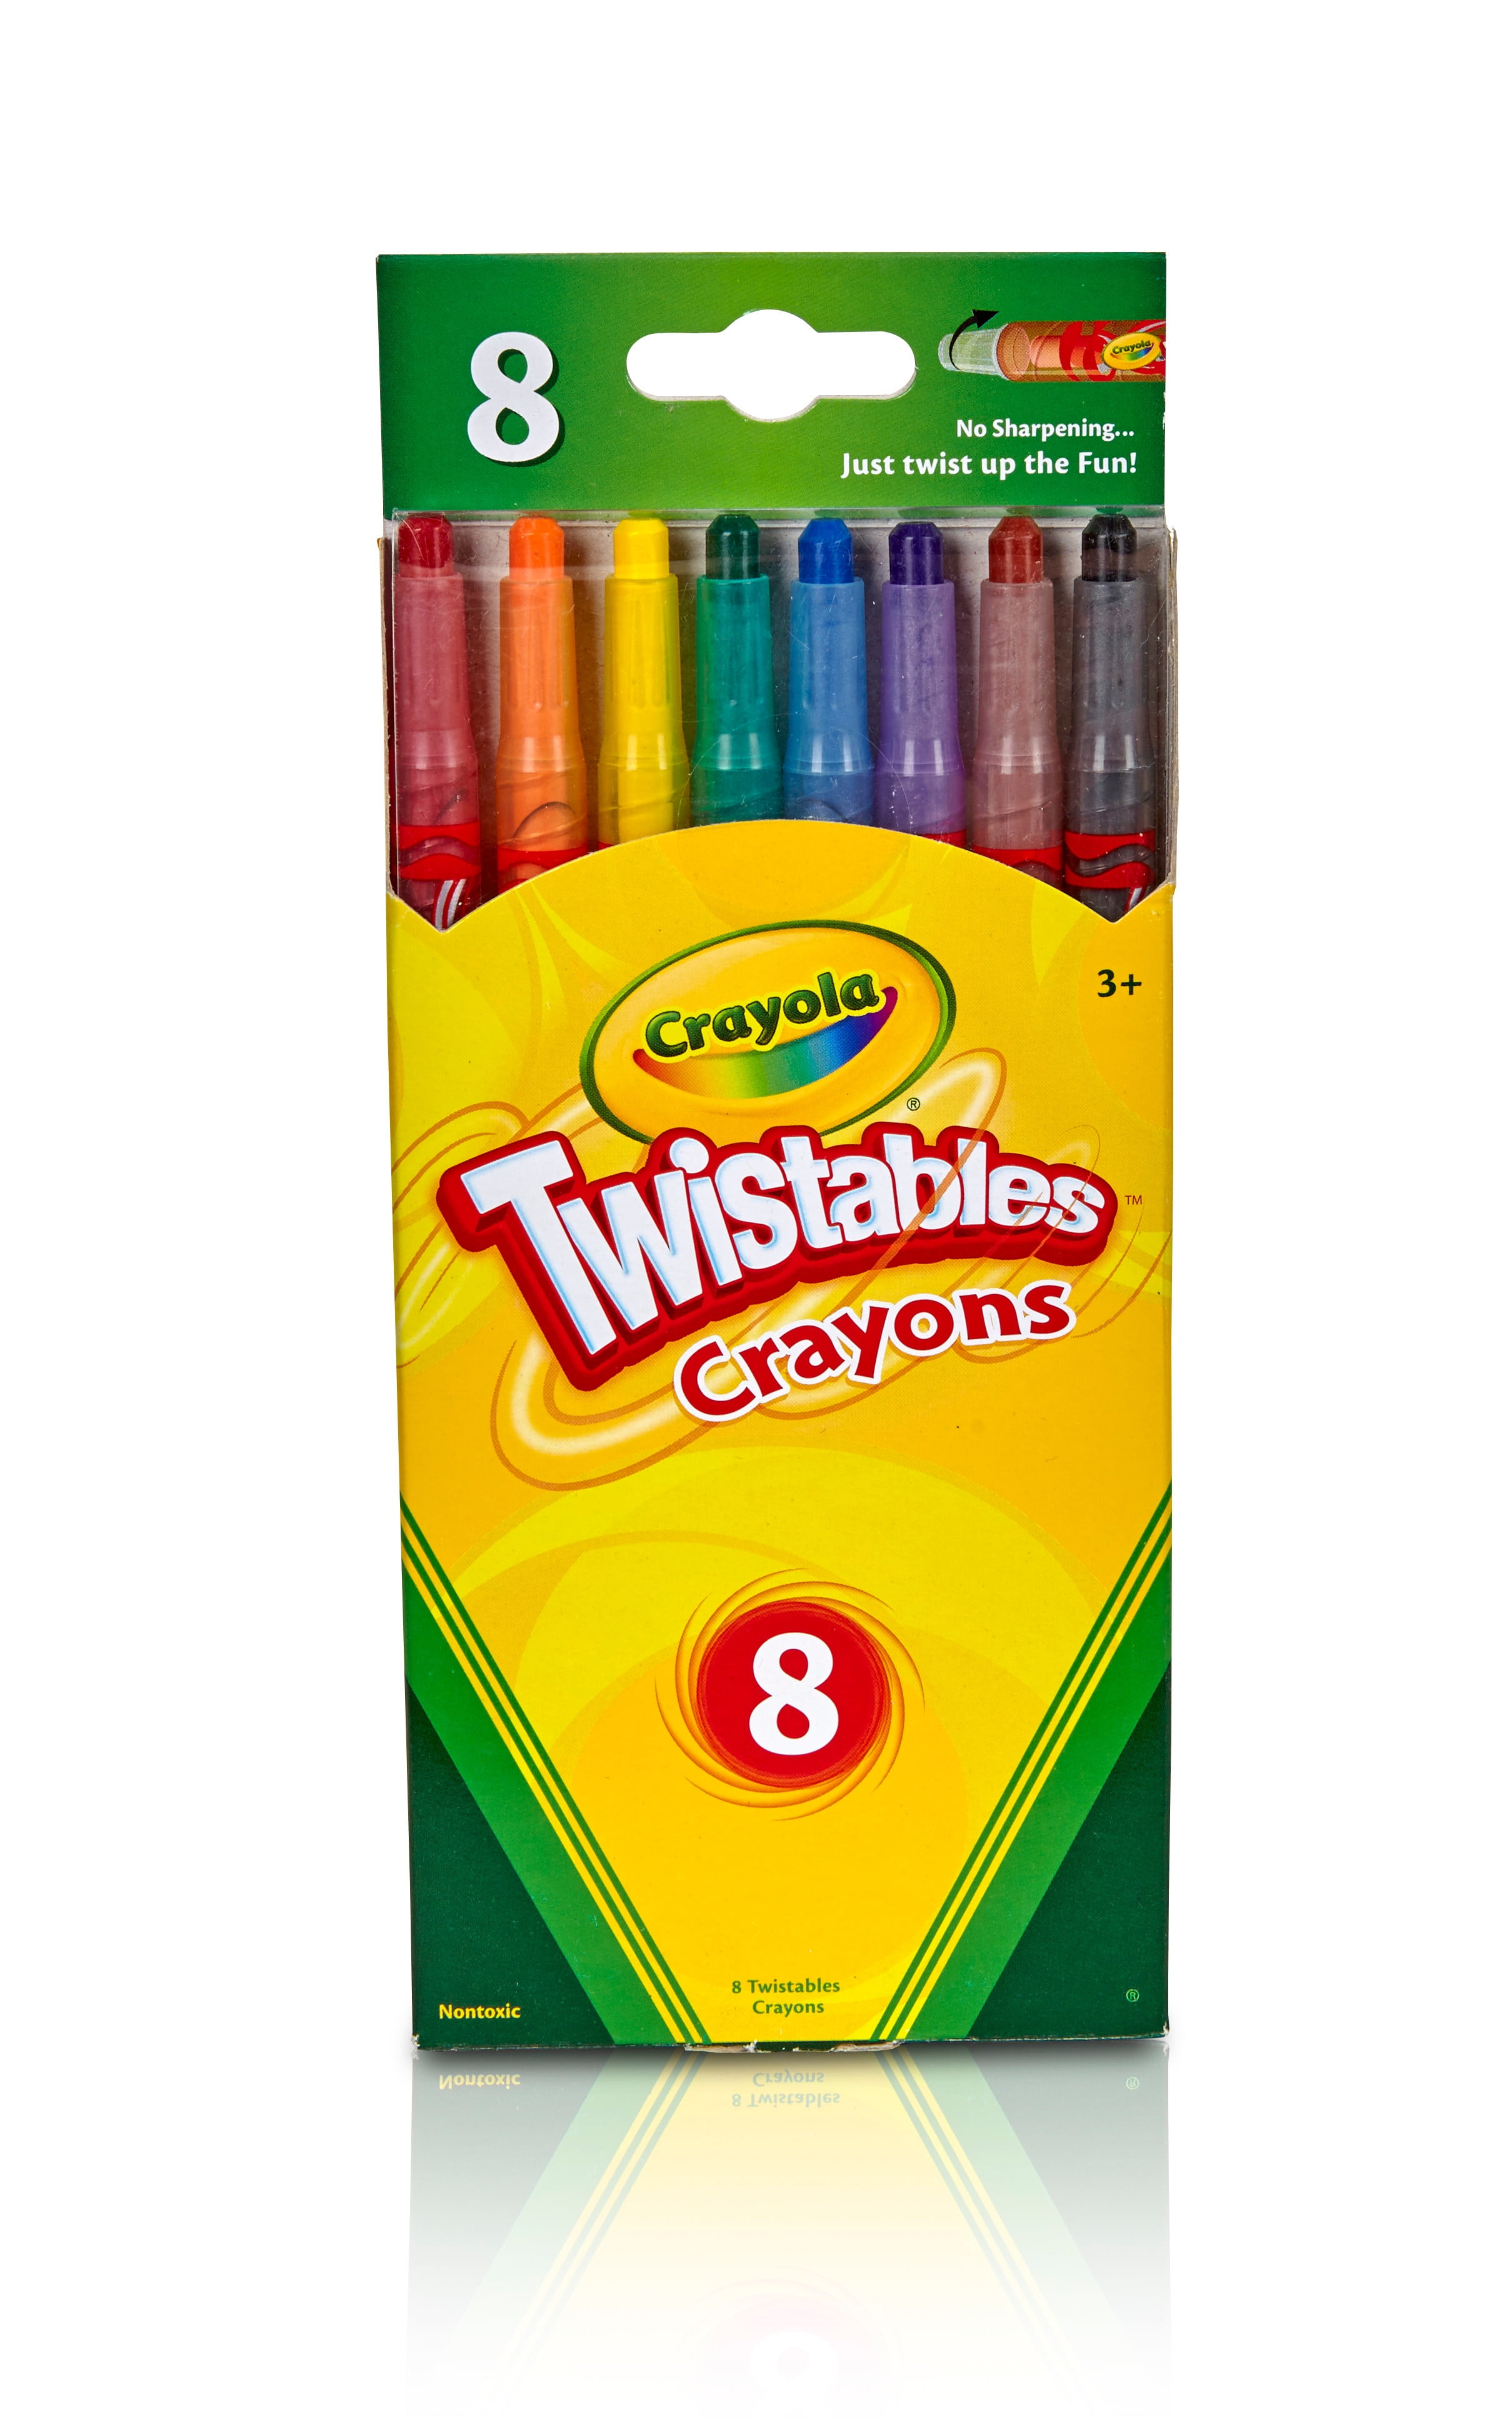 - Break-resistant Crayola Products 8 Traditional Colors/Set Crayola Twistable Crayons Sold As 1 Set clear plastic barrel shows crayon supply No sharpening or label peeling needed - Built-in eraser on each crayon makes for easy changes and corre 